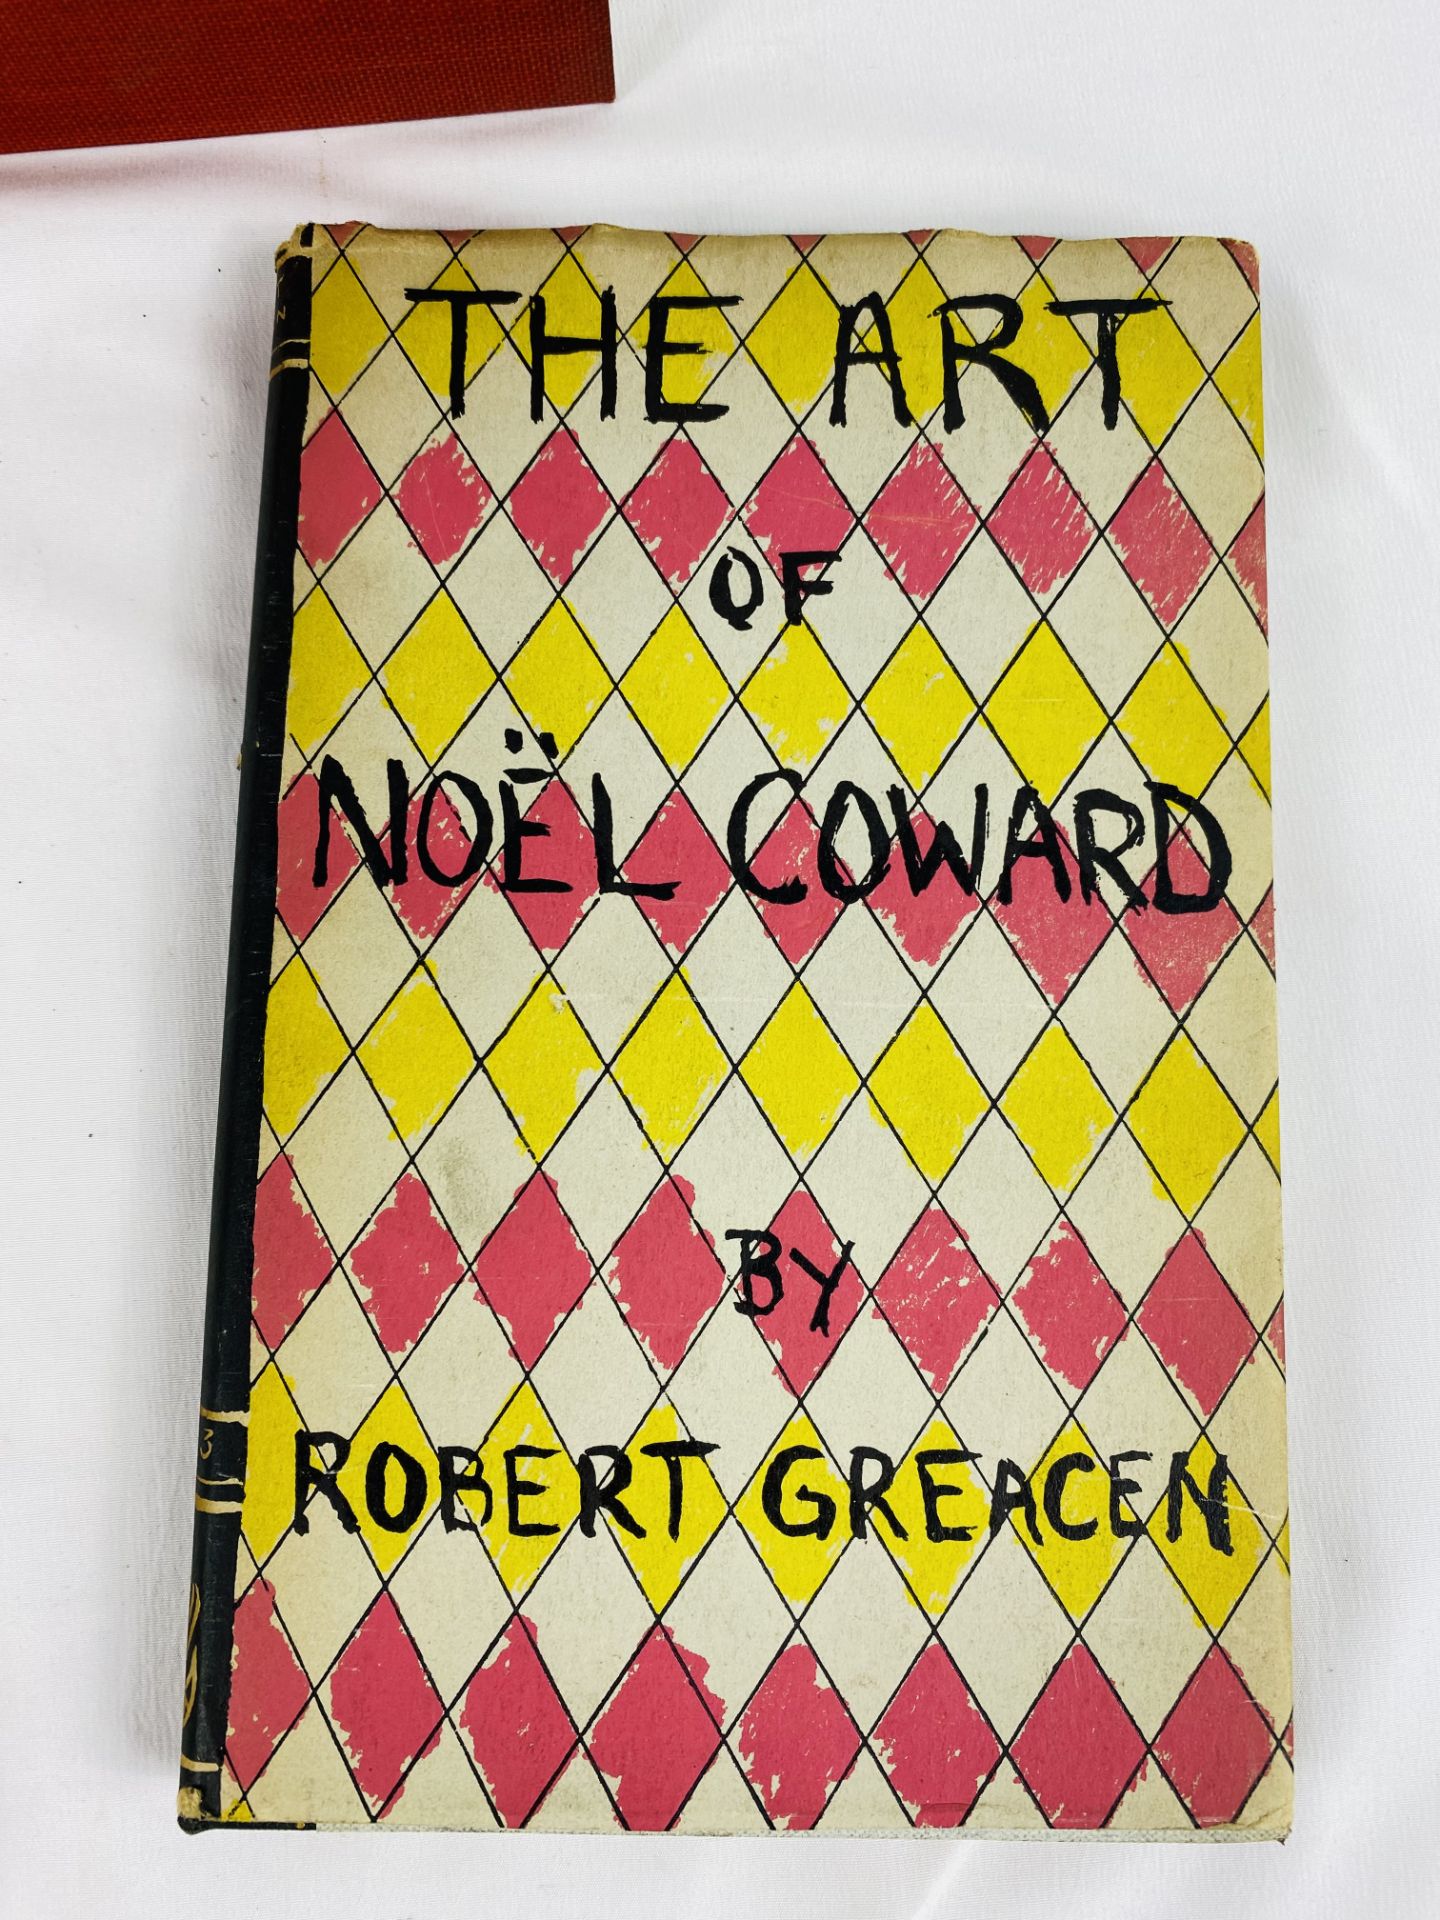 Noel Coward, Quadrille, together with two copies of The Art of Noel Coward by Robert Greacen - Image 3 of 7